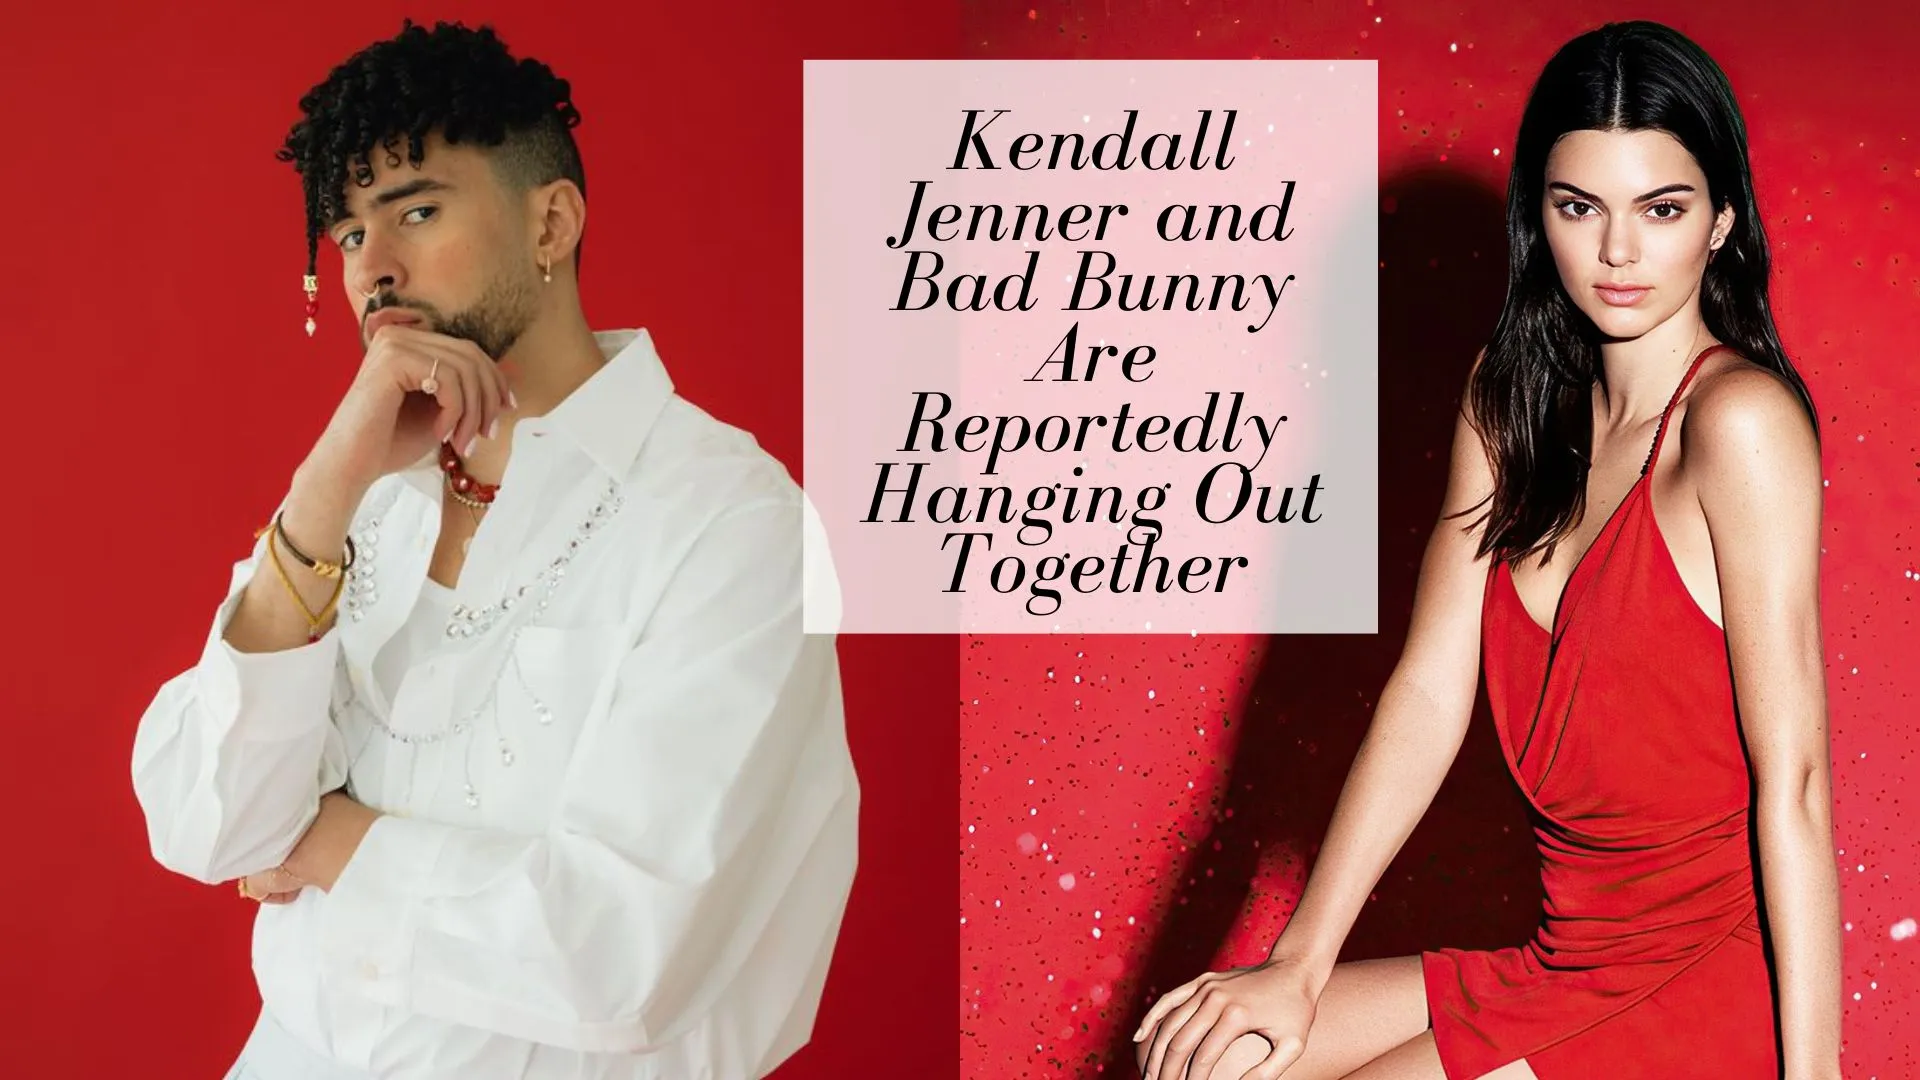 Kendall Jenner and Bad Bunny Are Reportedly Hanging Out Together (Image credit: harpersbazaar)